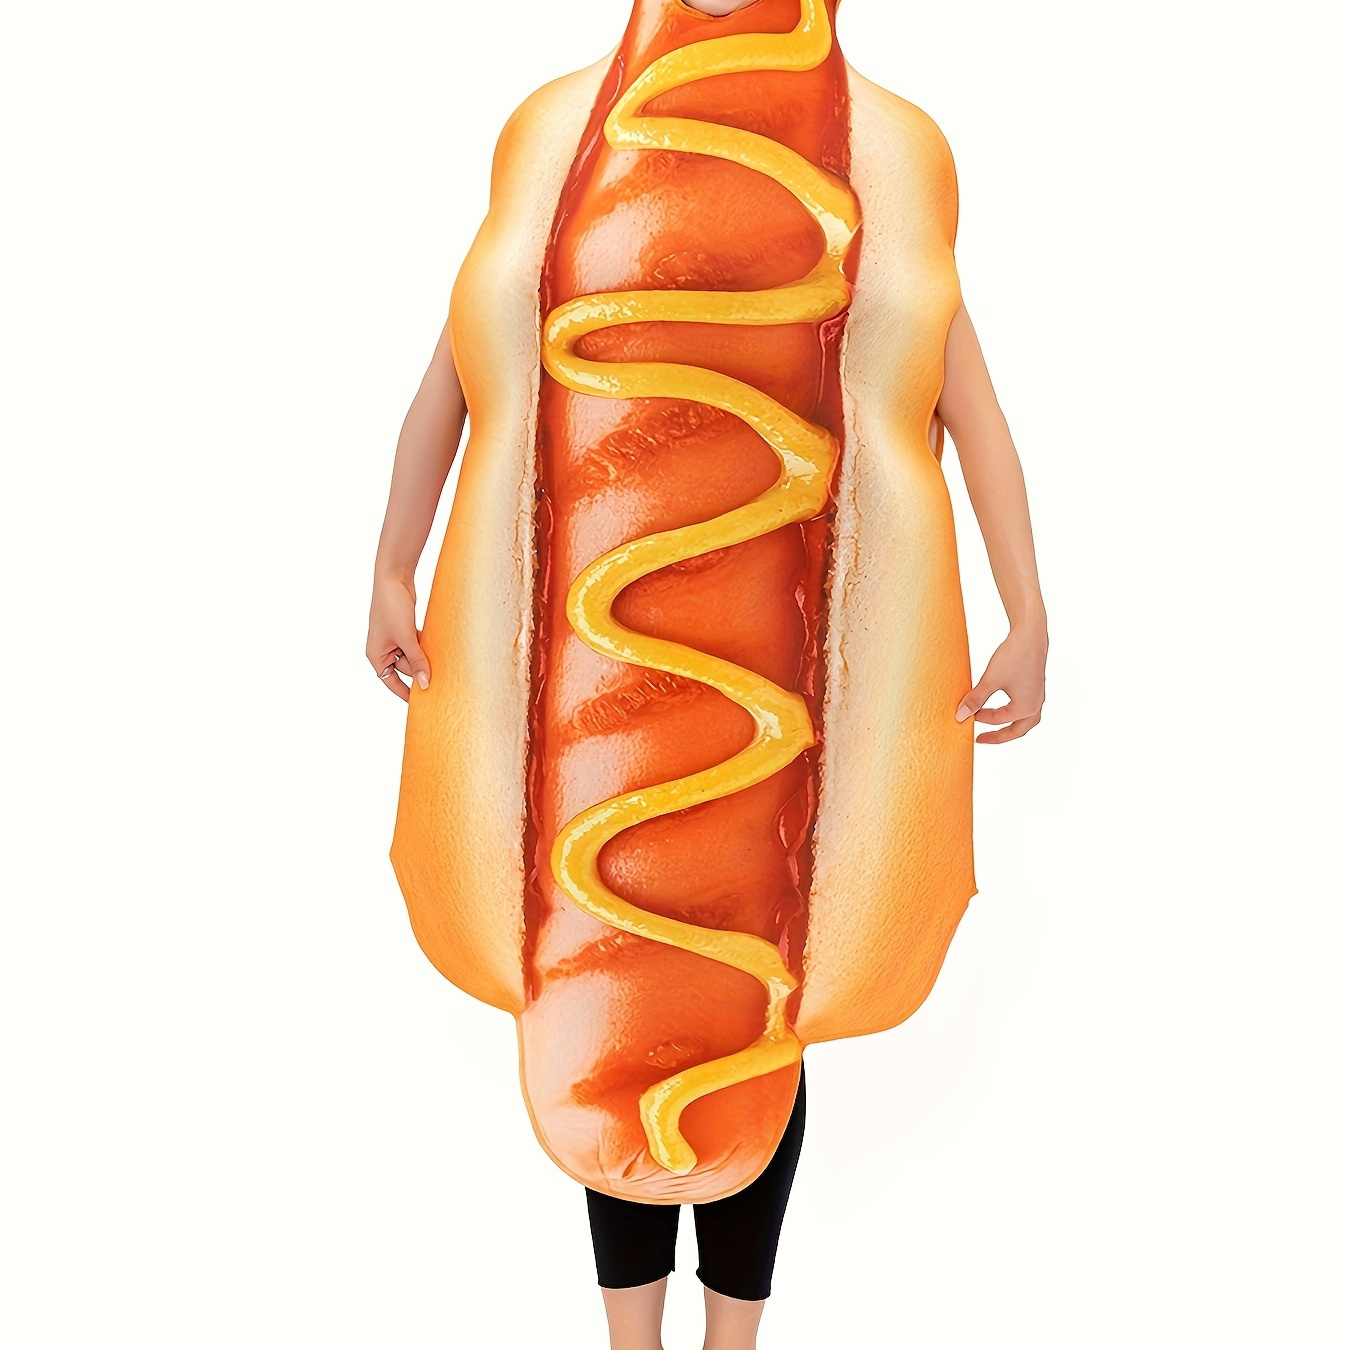 

One-piece Hot Dog Costume, Funny Food-themed Party Dress, Novelty Outfit For Halloween And Festive Occasions, Women's Clothing